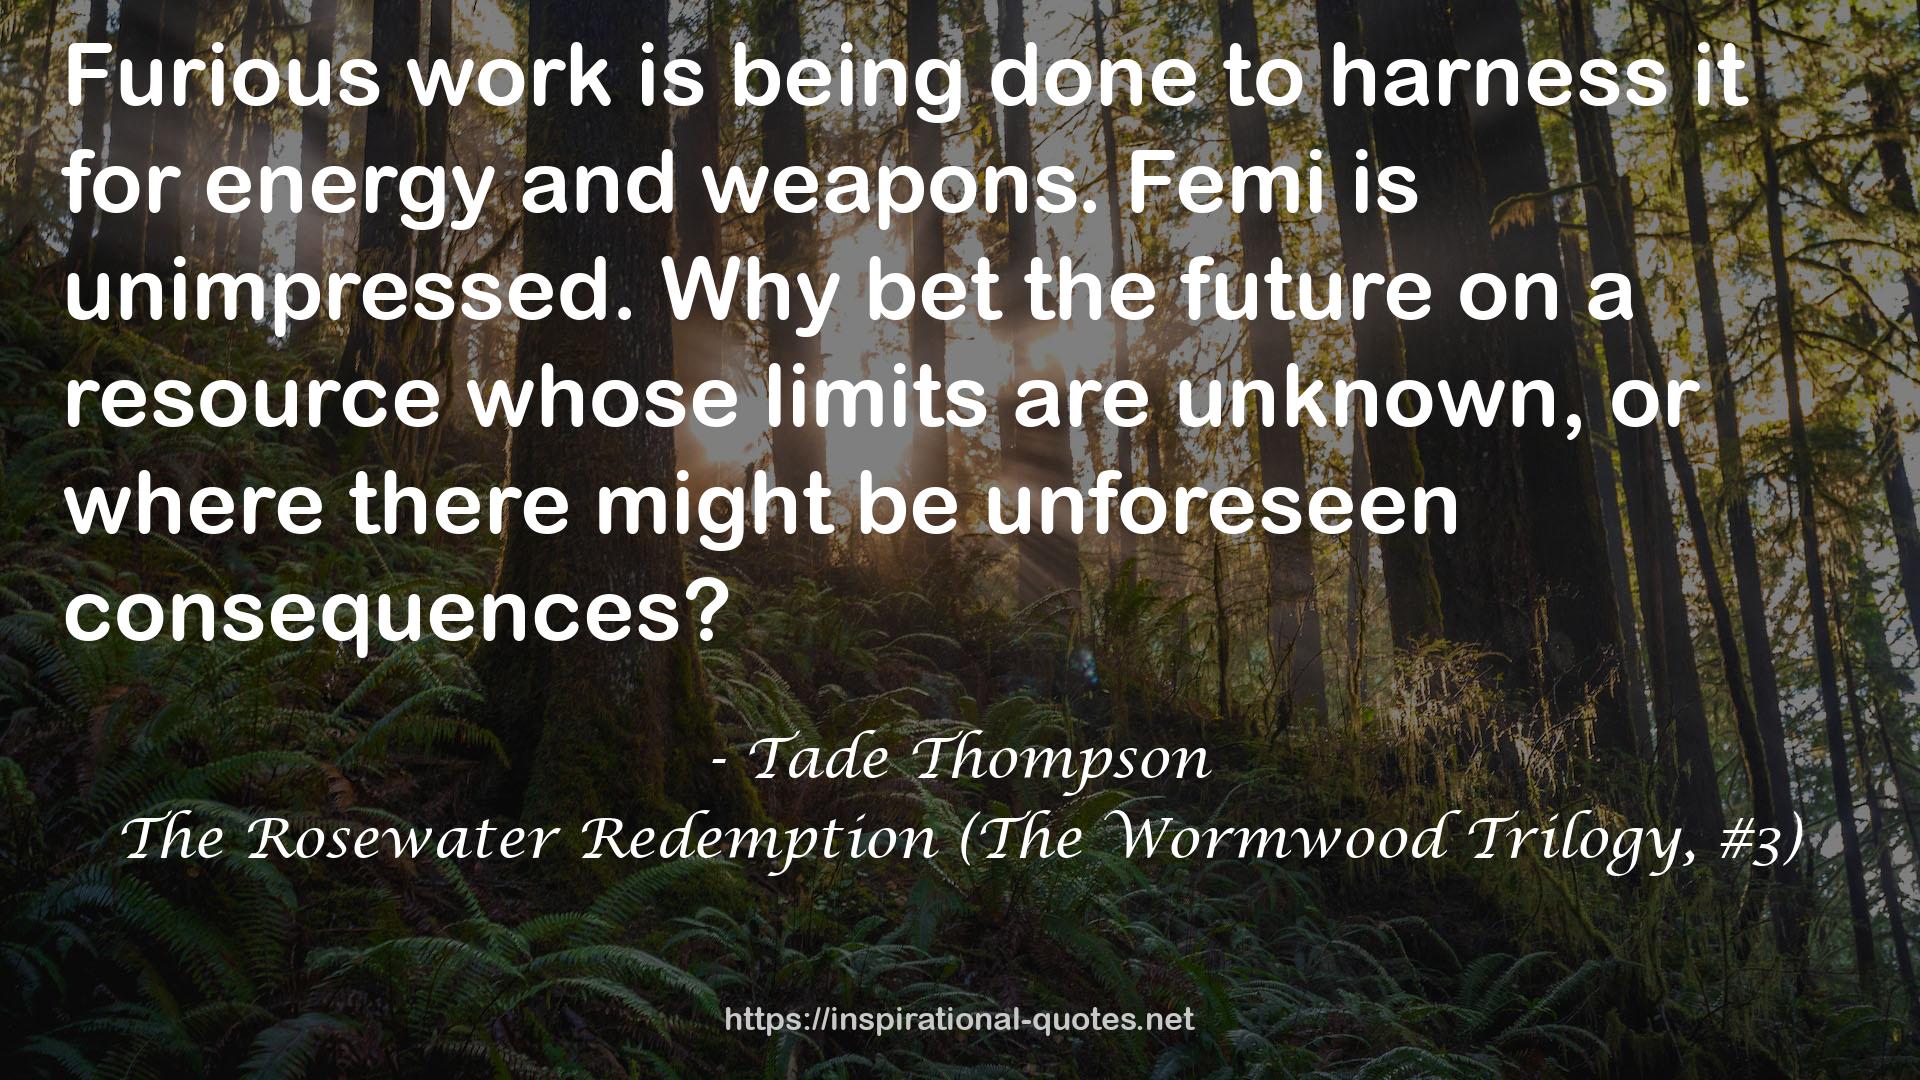 The Rosewater Redemption (The Wormwood Trilogy, #3) QUOTES